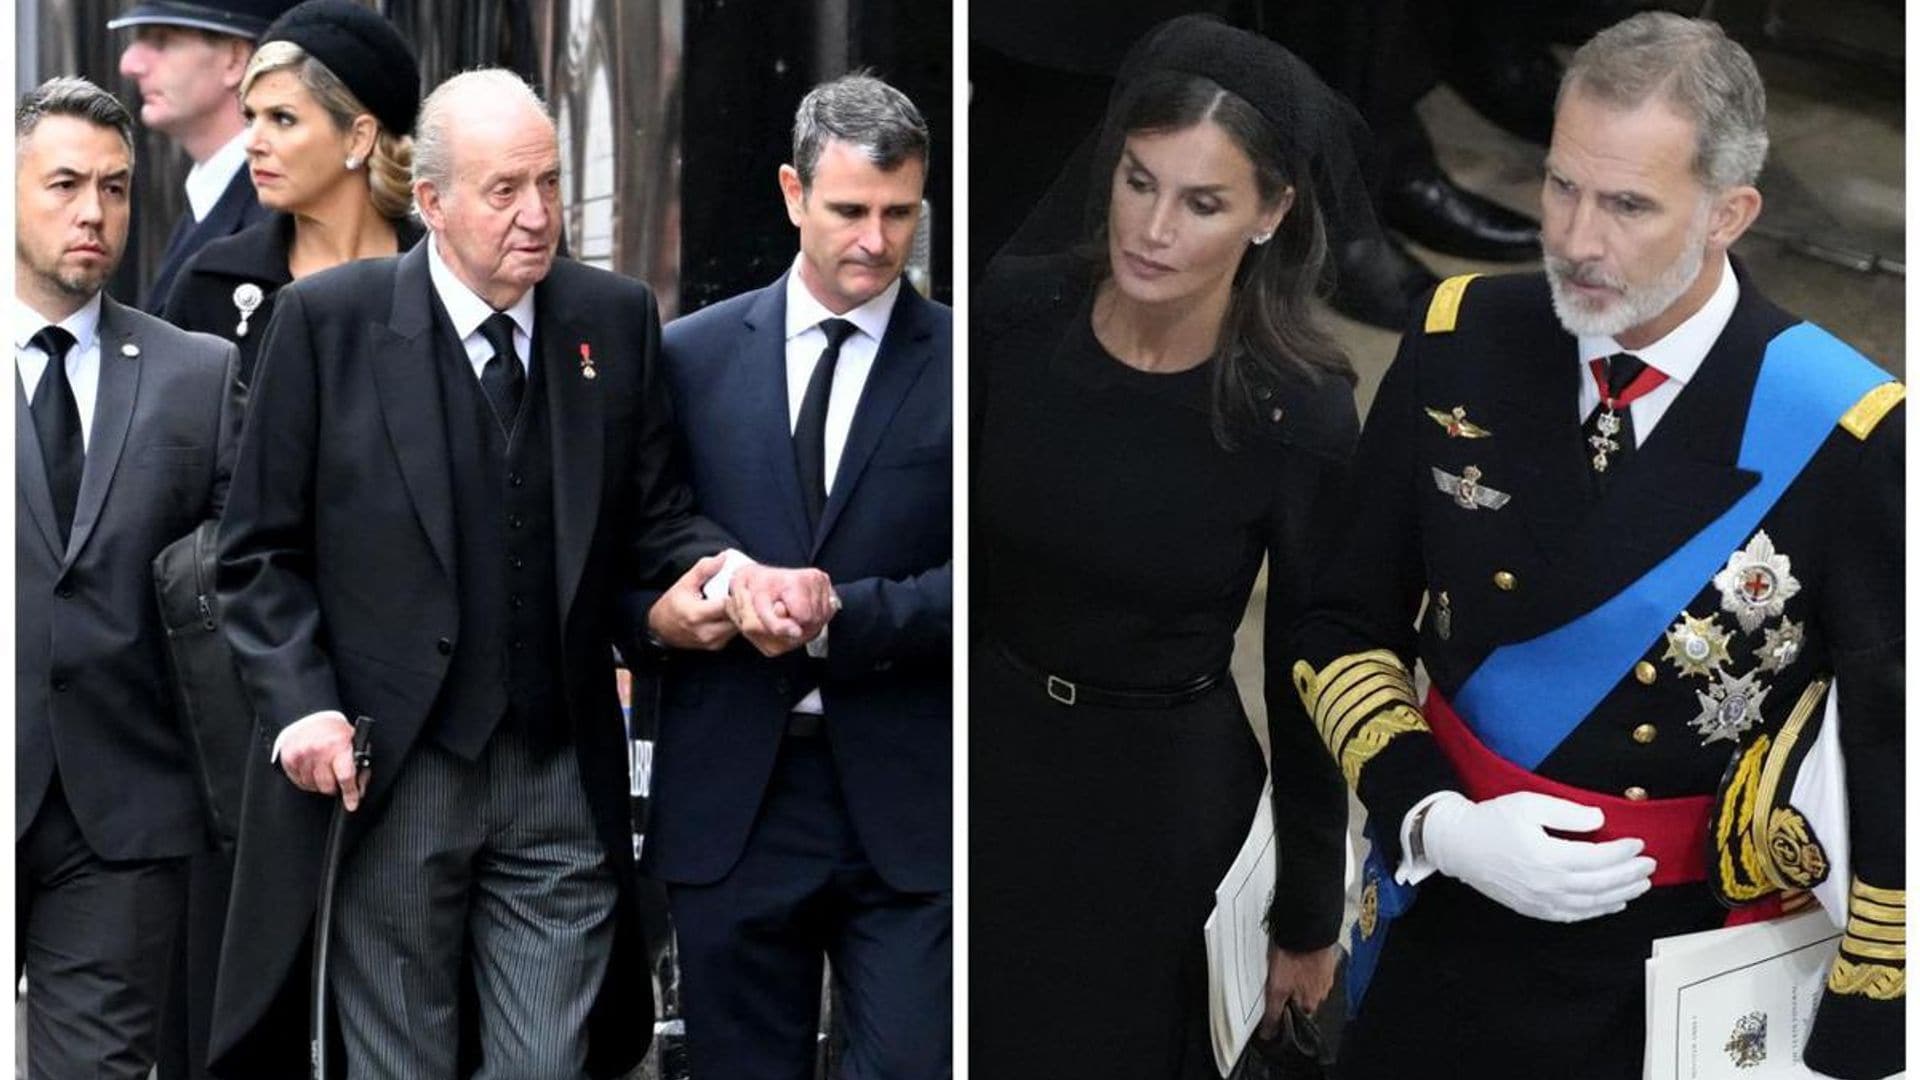 The four Kings of Spain reappeared together at the funeral of Queen Elizabeth II